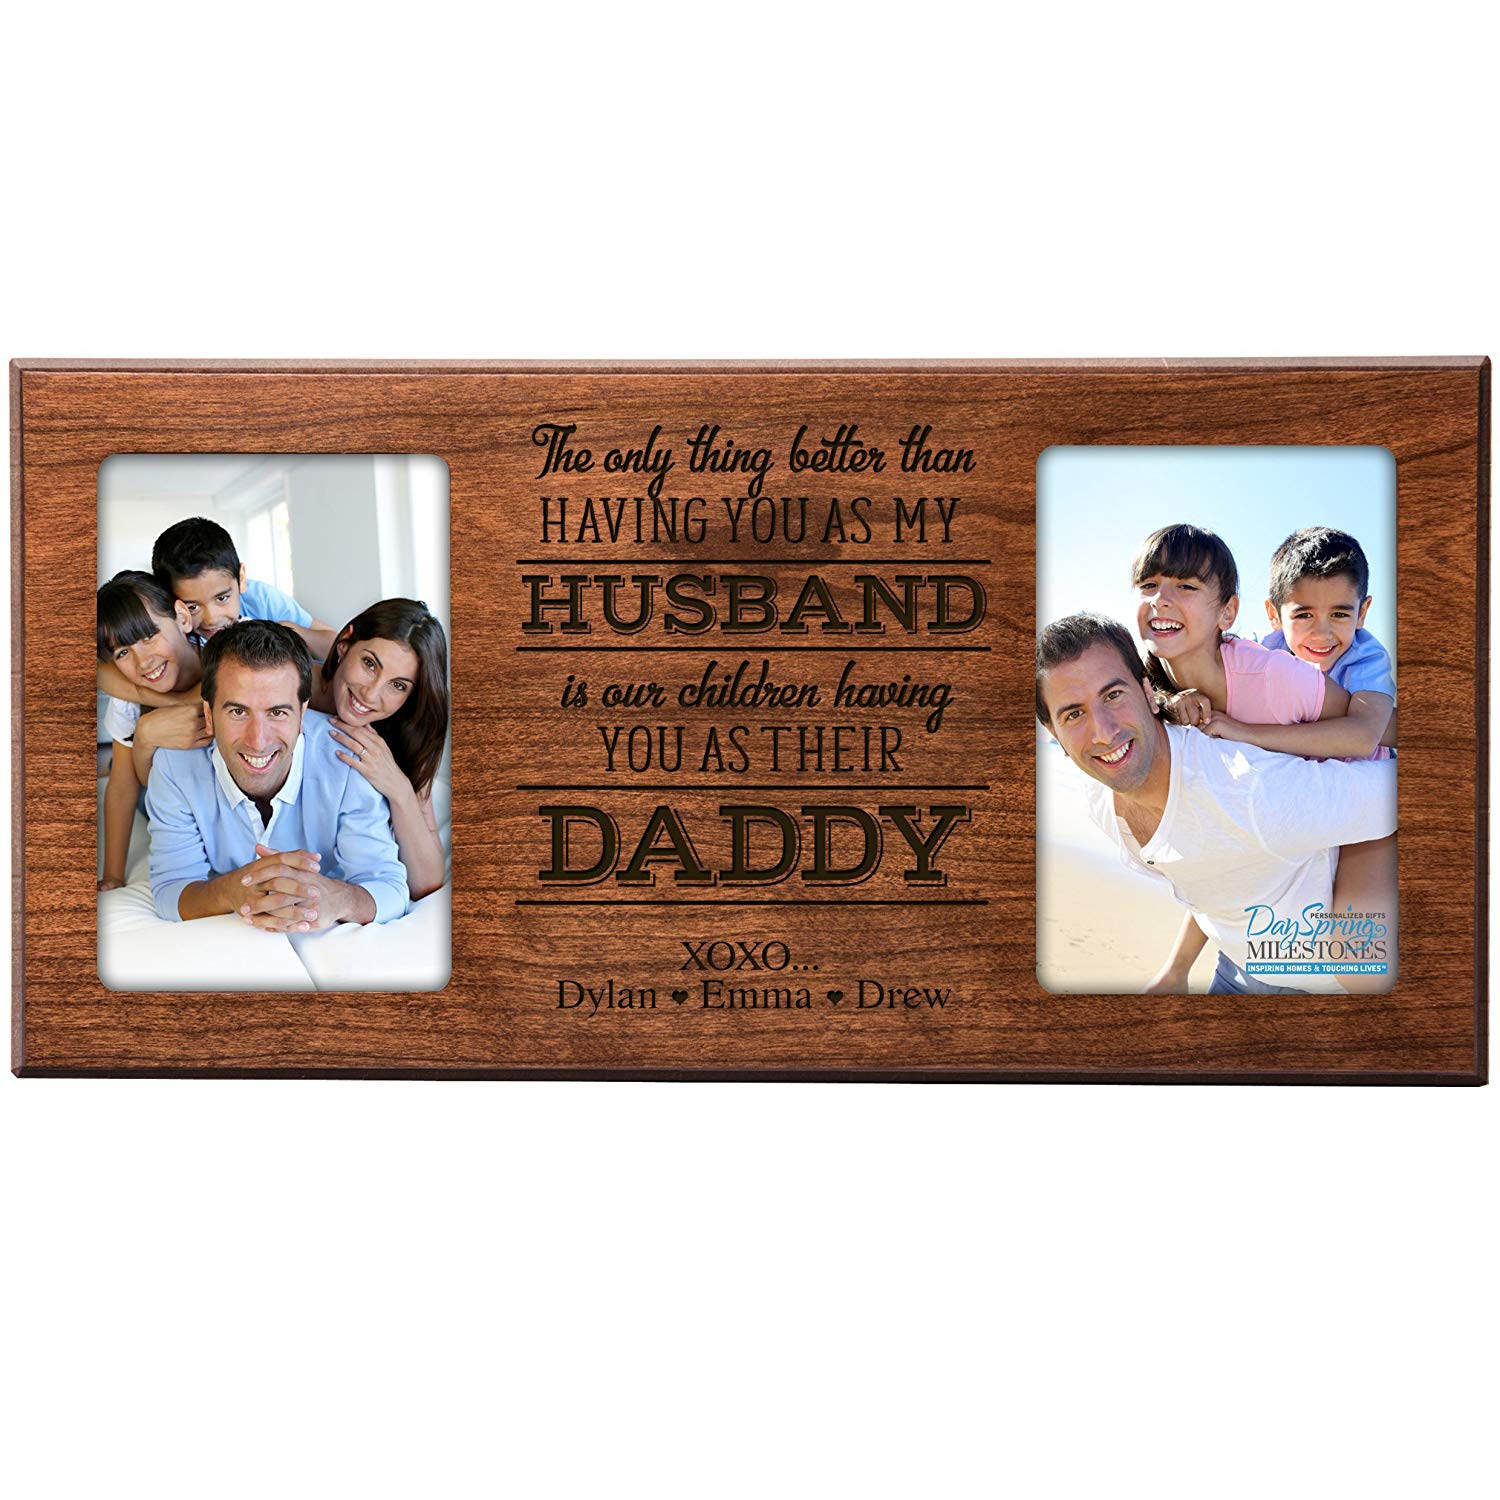 5-Month Anniversary Gifts | Personalized Gifts for Husband & Wife |  Visual.ly